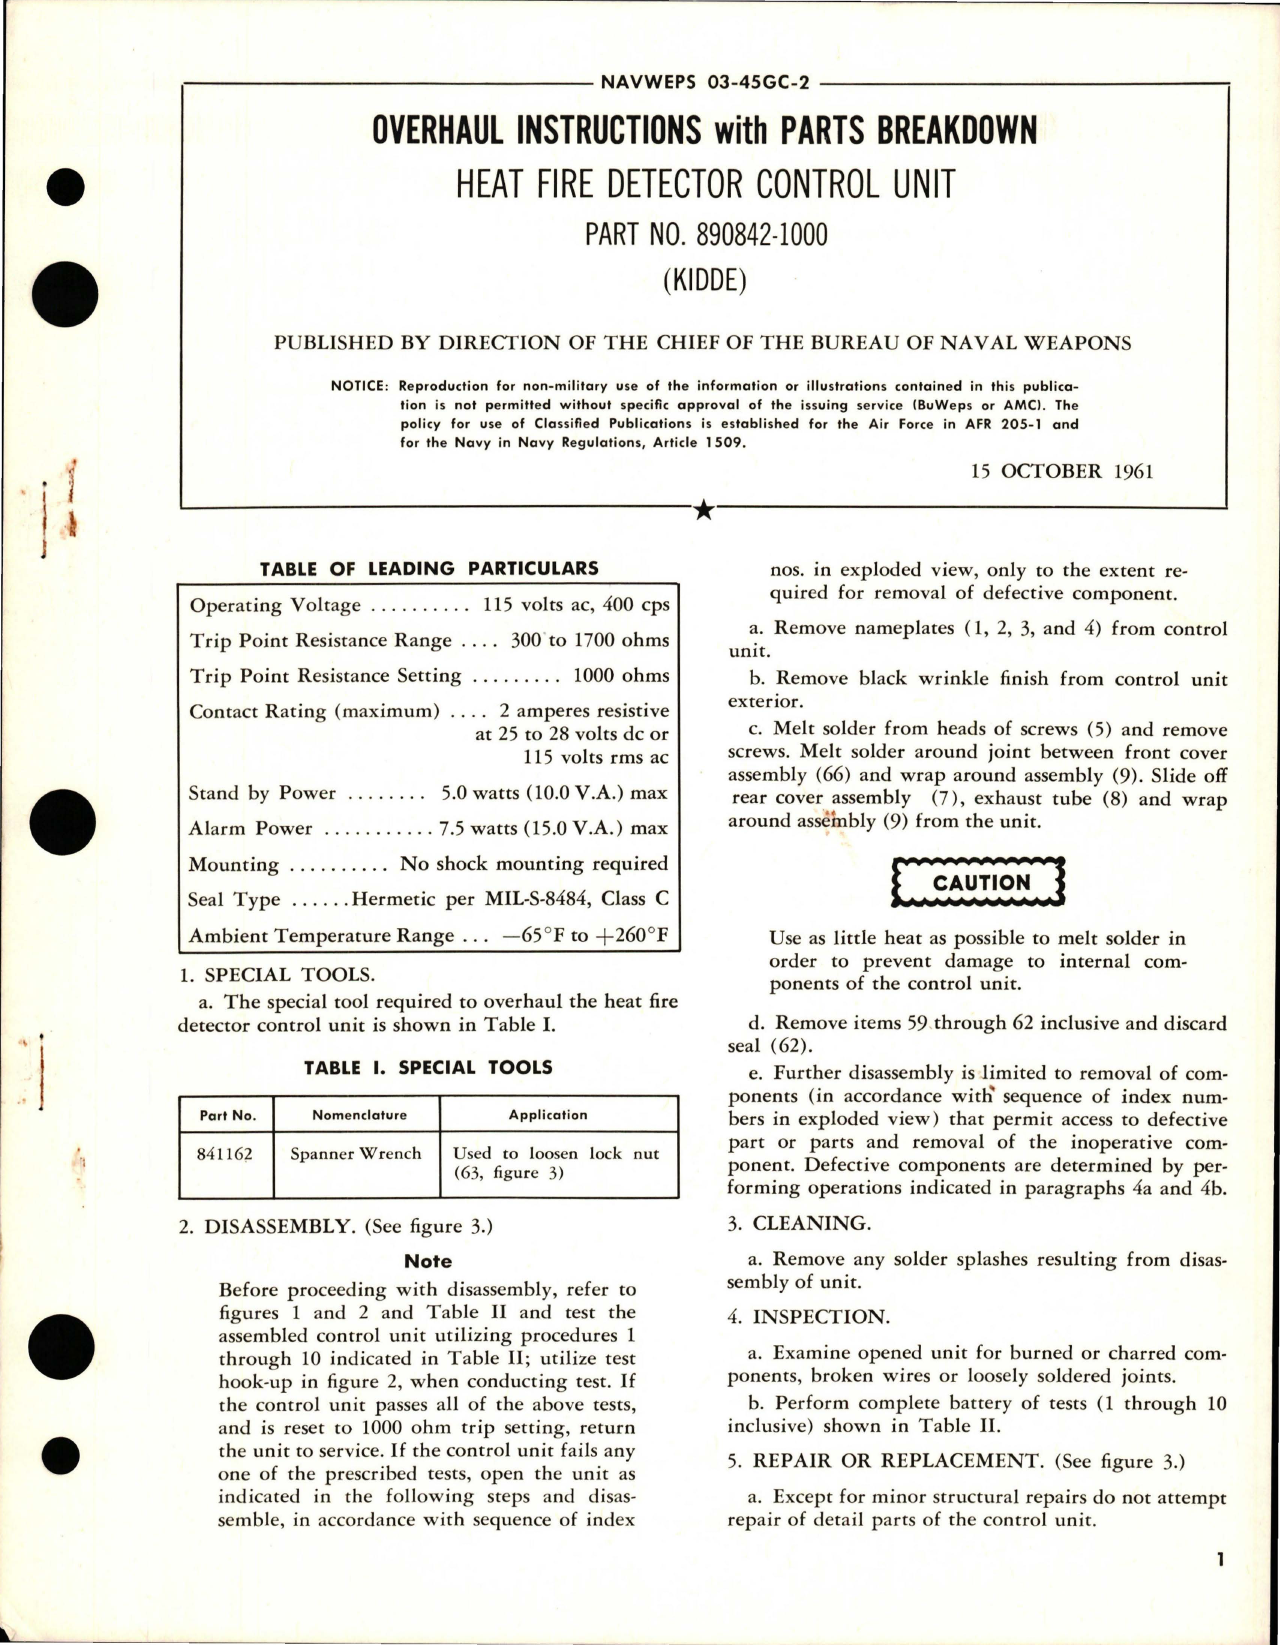 Sample page 1 from AirCorps Library document: Overhaul Instructions with Parts Breakdown for Heat Fire Detector Control Unit - Part 890842-1000